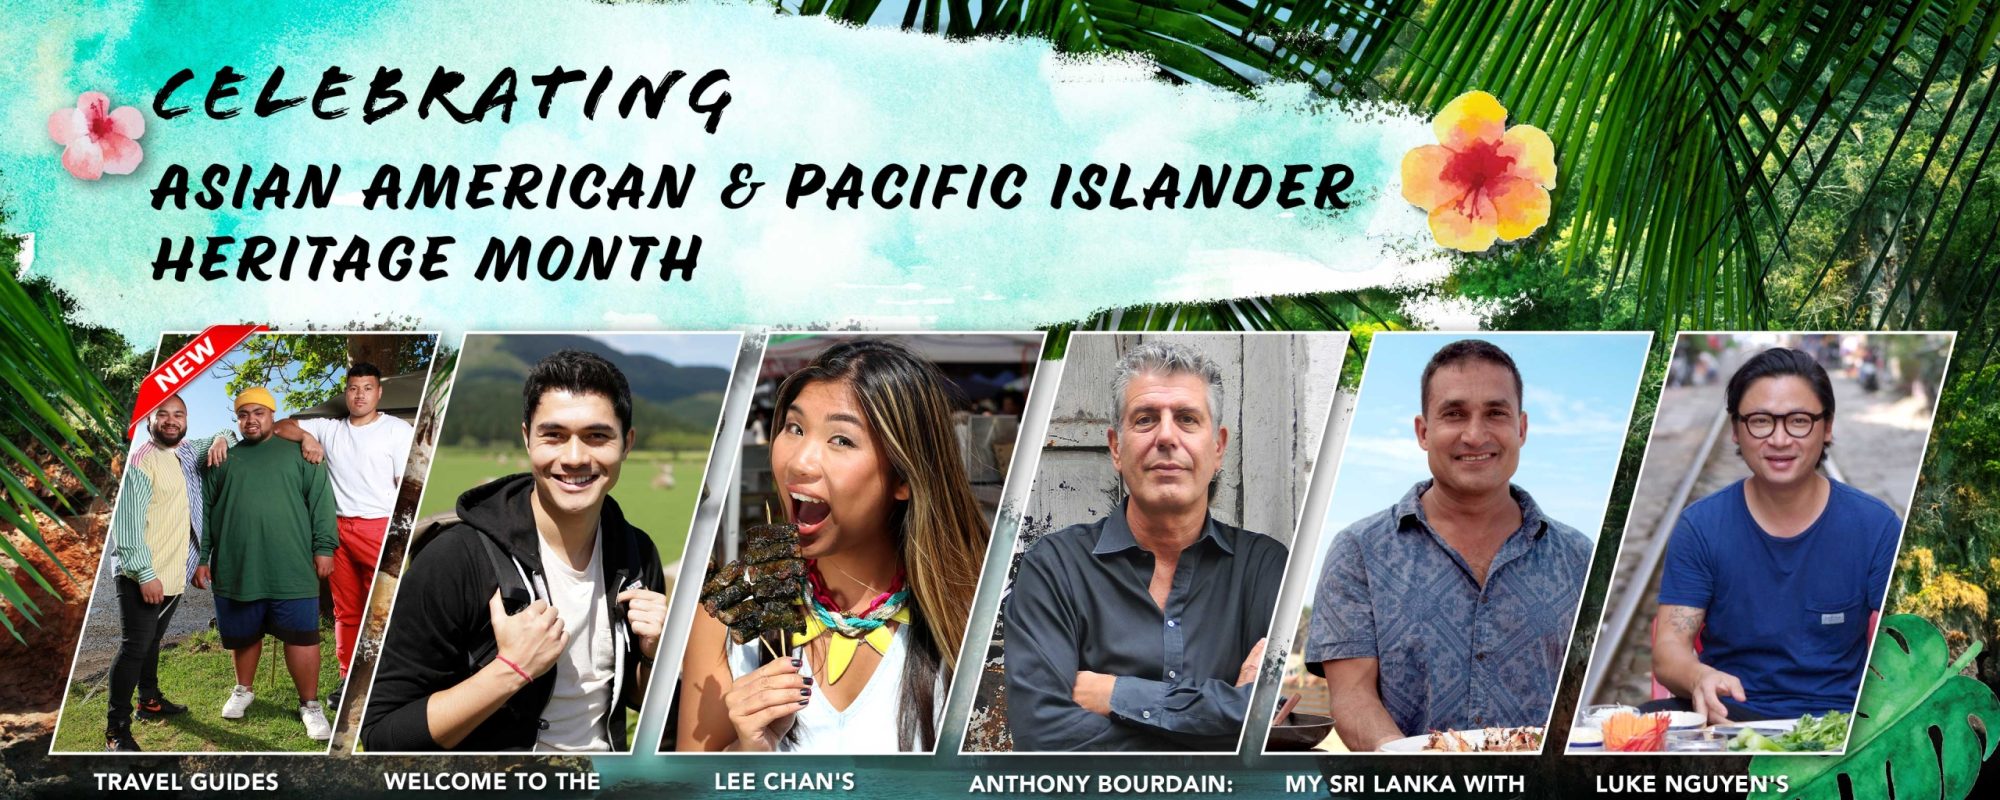 CELEBRATE ASIAN AMERICAN & PACIFIC ISLANDER HERITAGE MONTH IN MAY WITH THE SEASON PREMIERE OF <em>TRAVEL GUIDES NEW ZEALAND</em> ON JOURNY